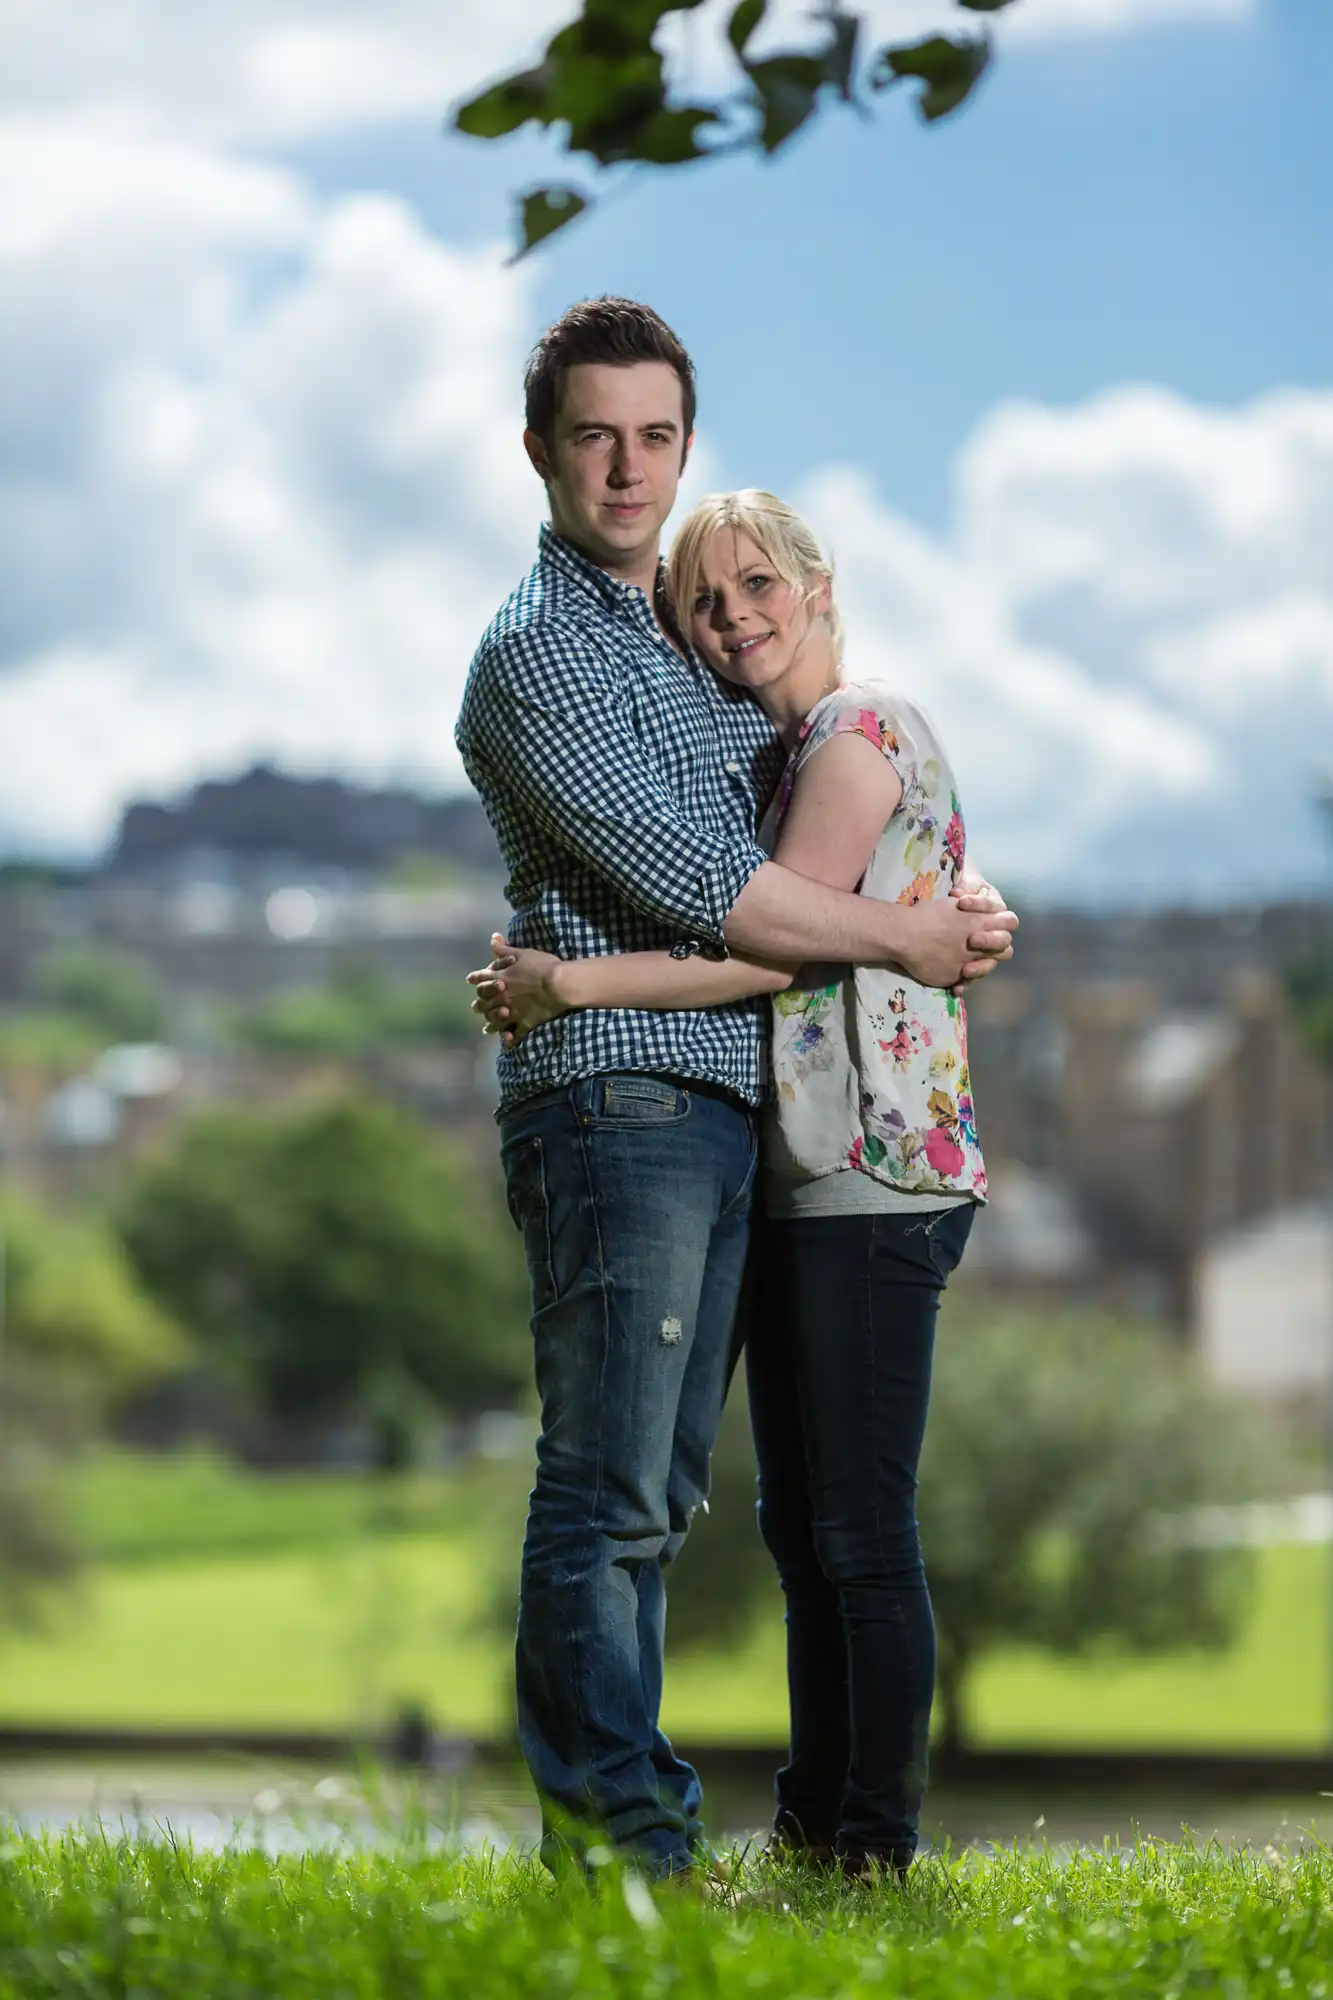 A young man and woman embracing in a sunny park, with a cityscape in the blurred background.